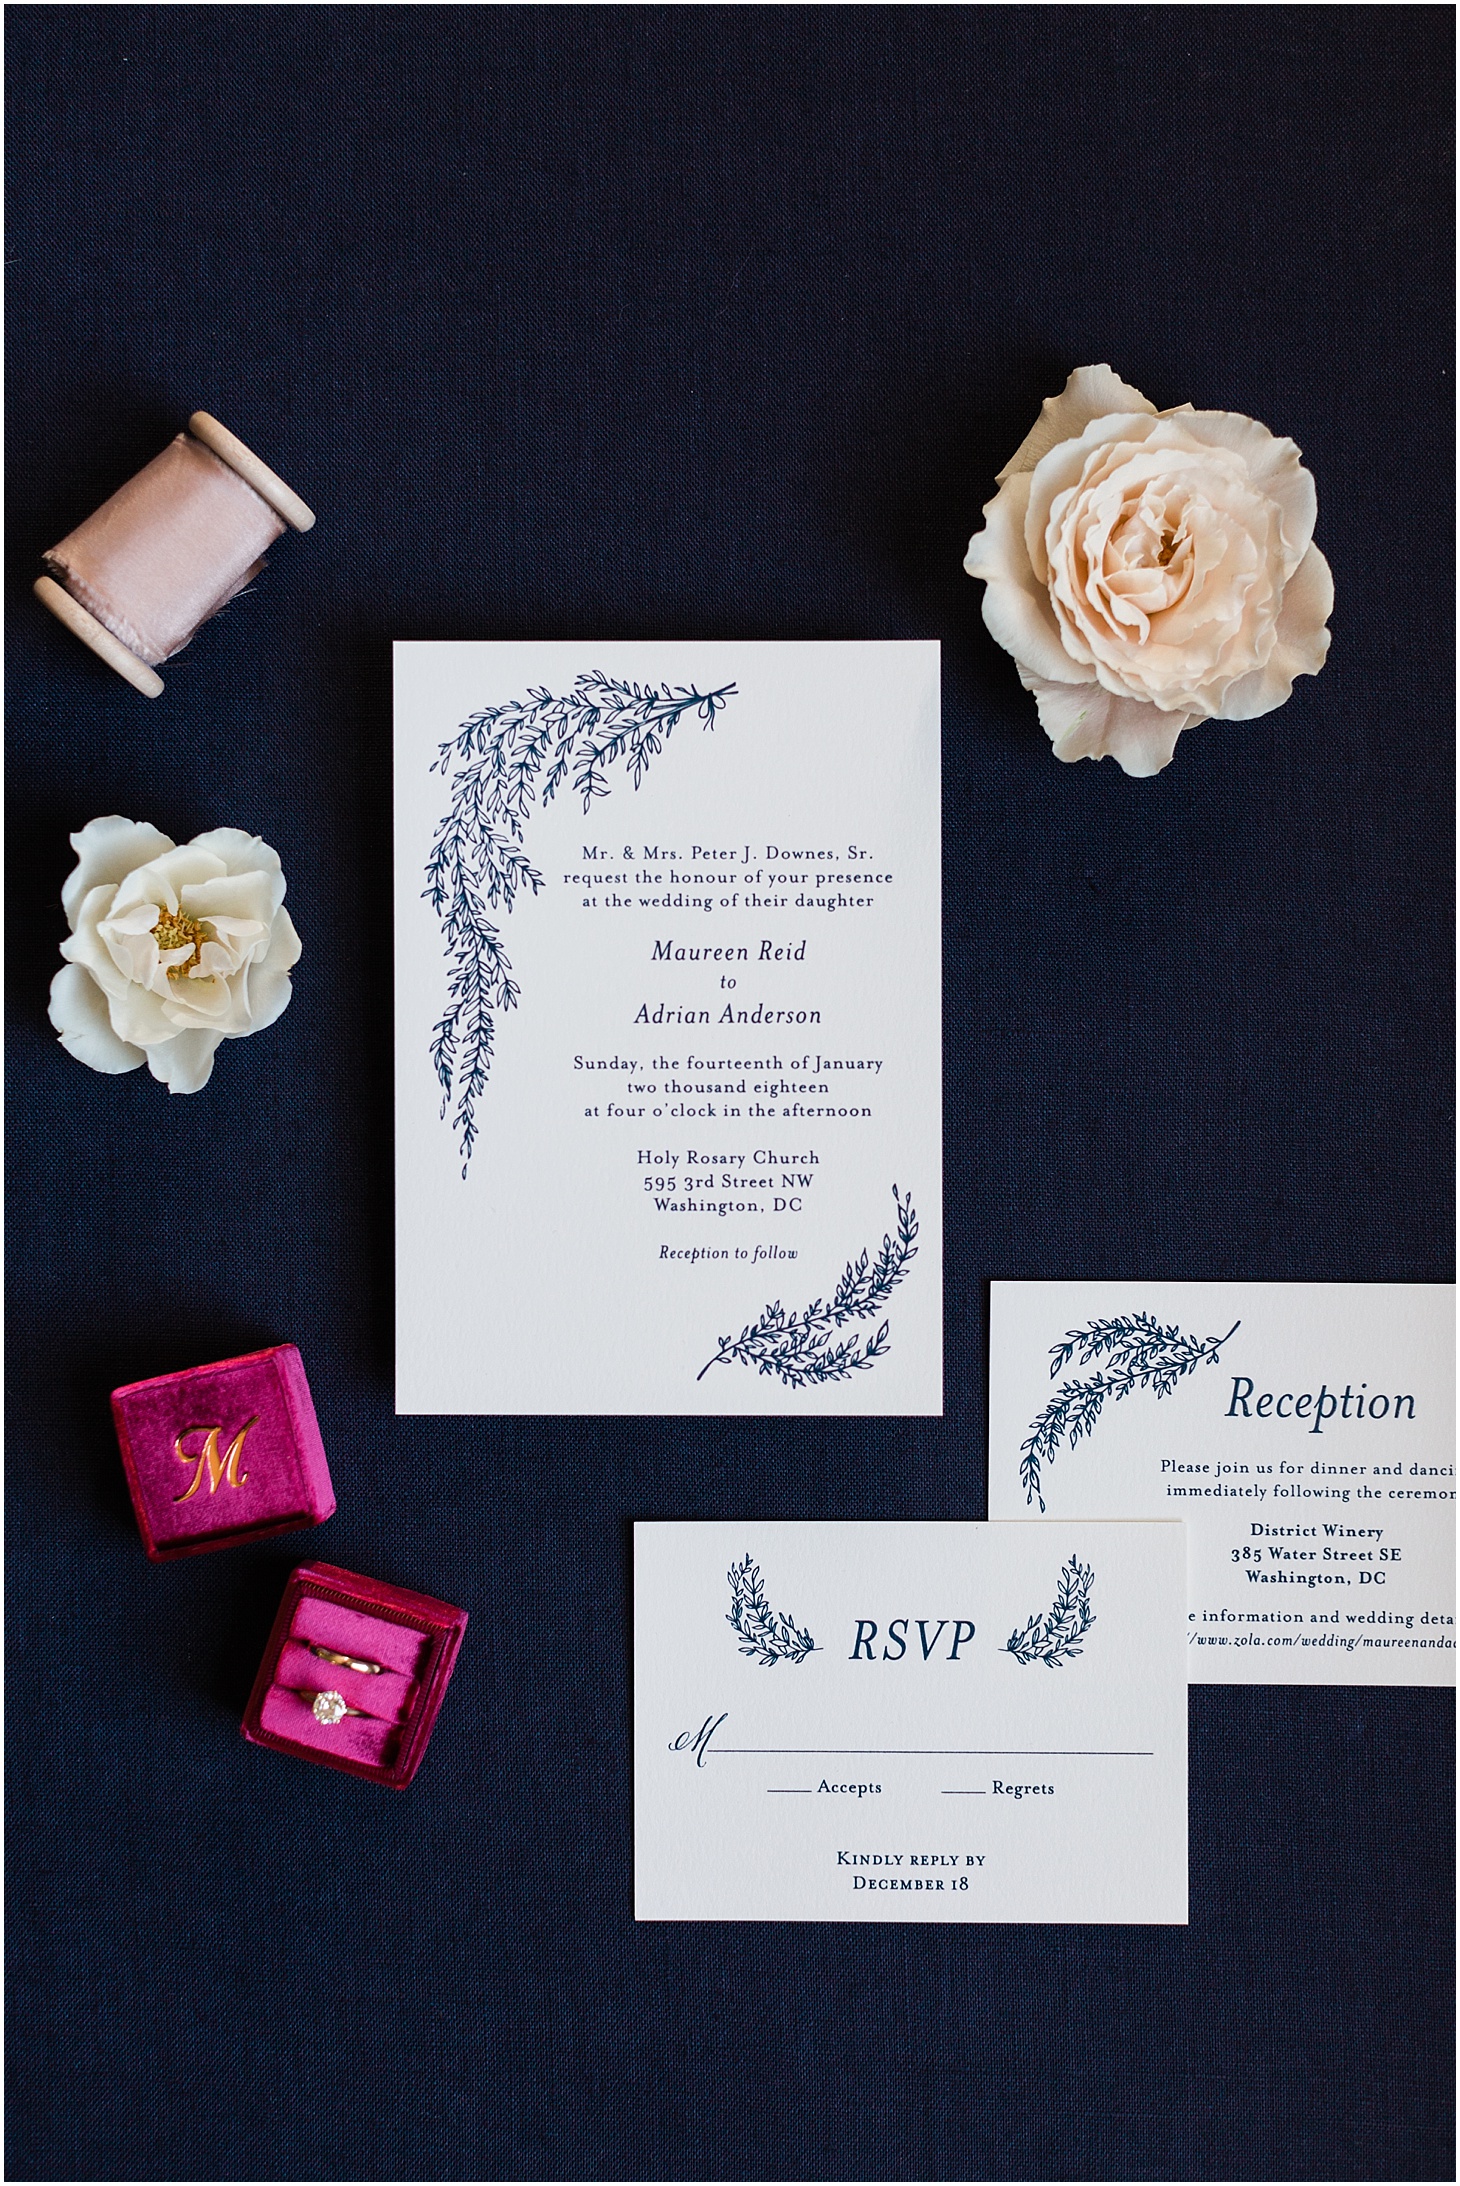 White and Navy Wedding Invitation Suite | Ceremony at the Holy Rosary Church | Burgundy and Blush DC Wedding at District Winery | Sarah Bradshaw Photography